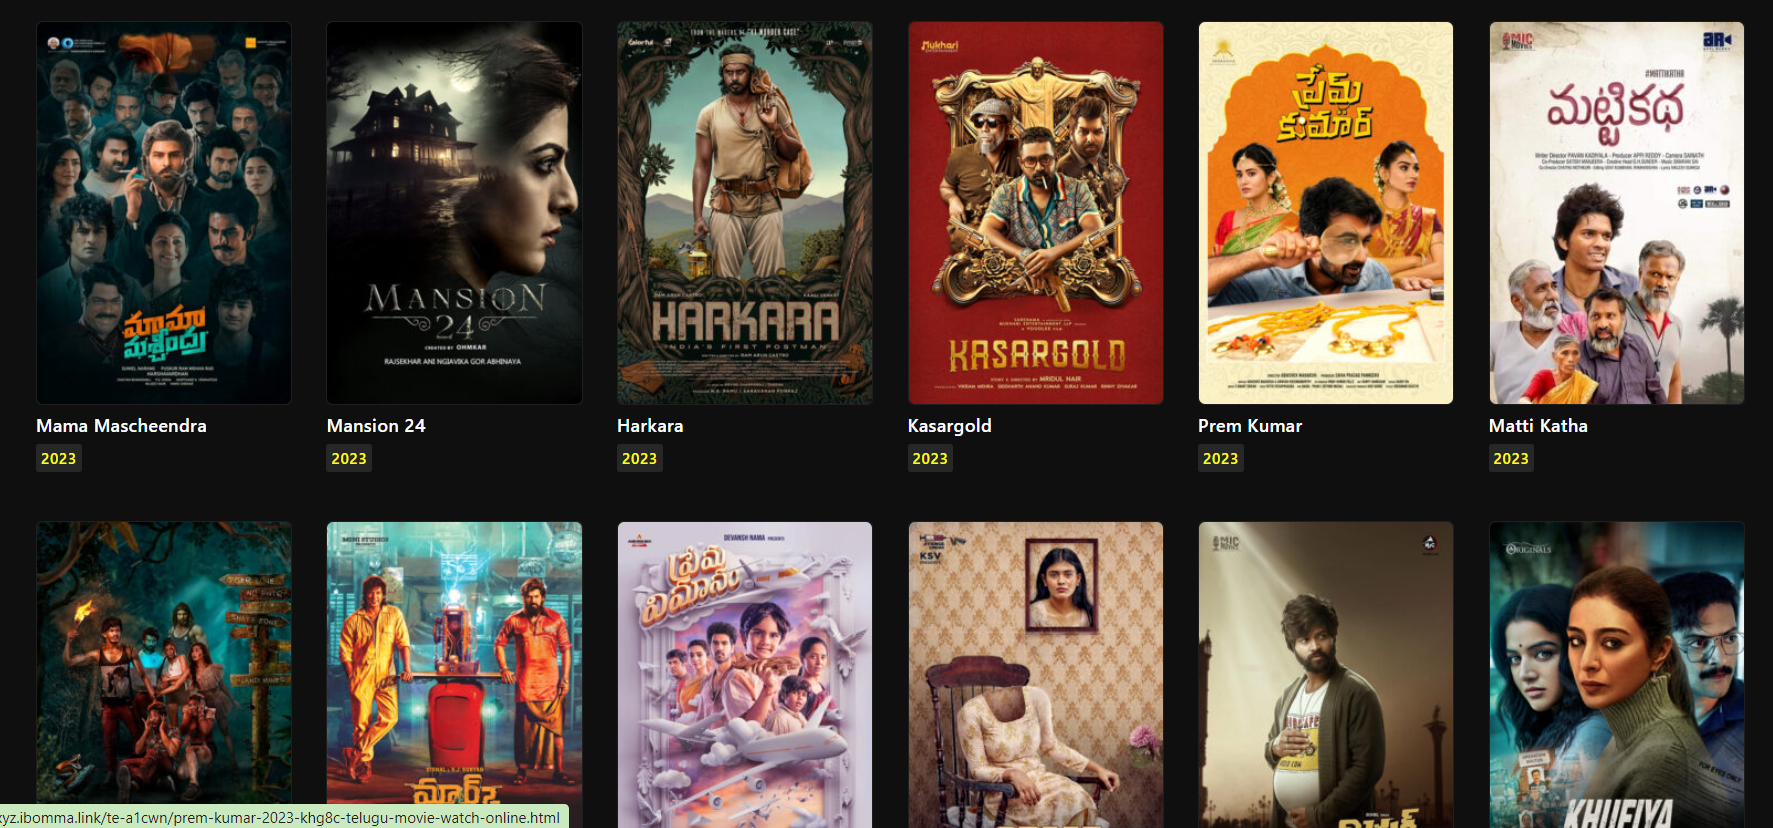 iBomma Telugu Movies New 2023: The Ultimate Guide for Watching and Downloading Latest Telugu Movies